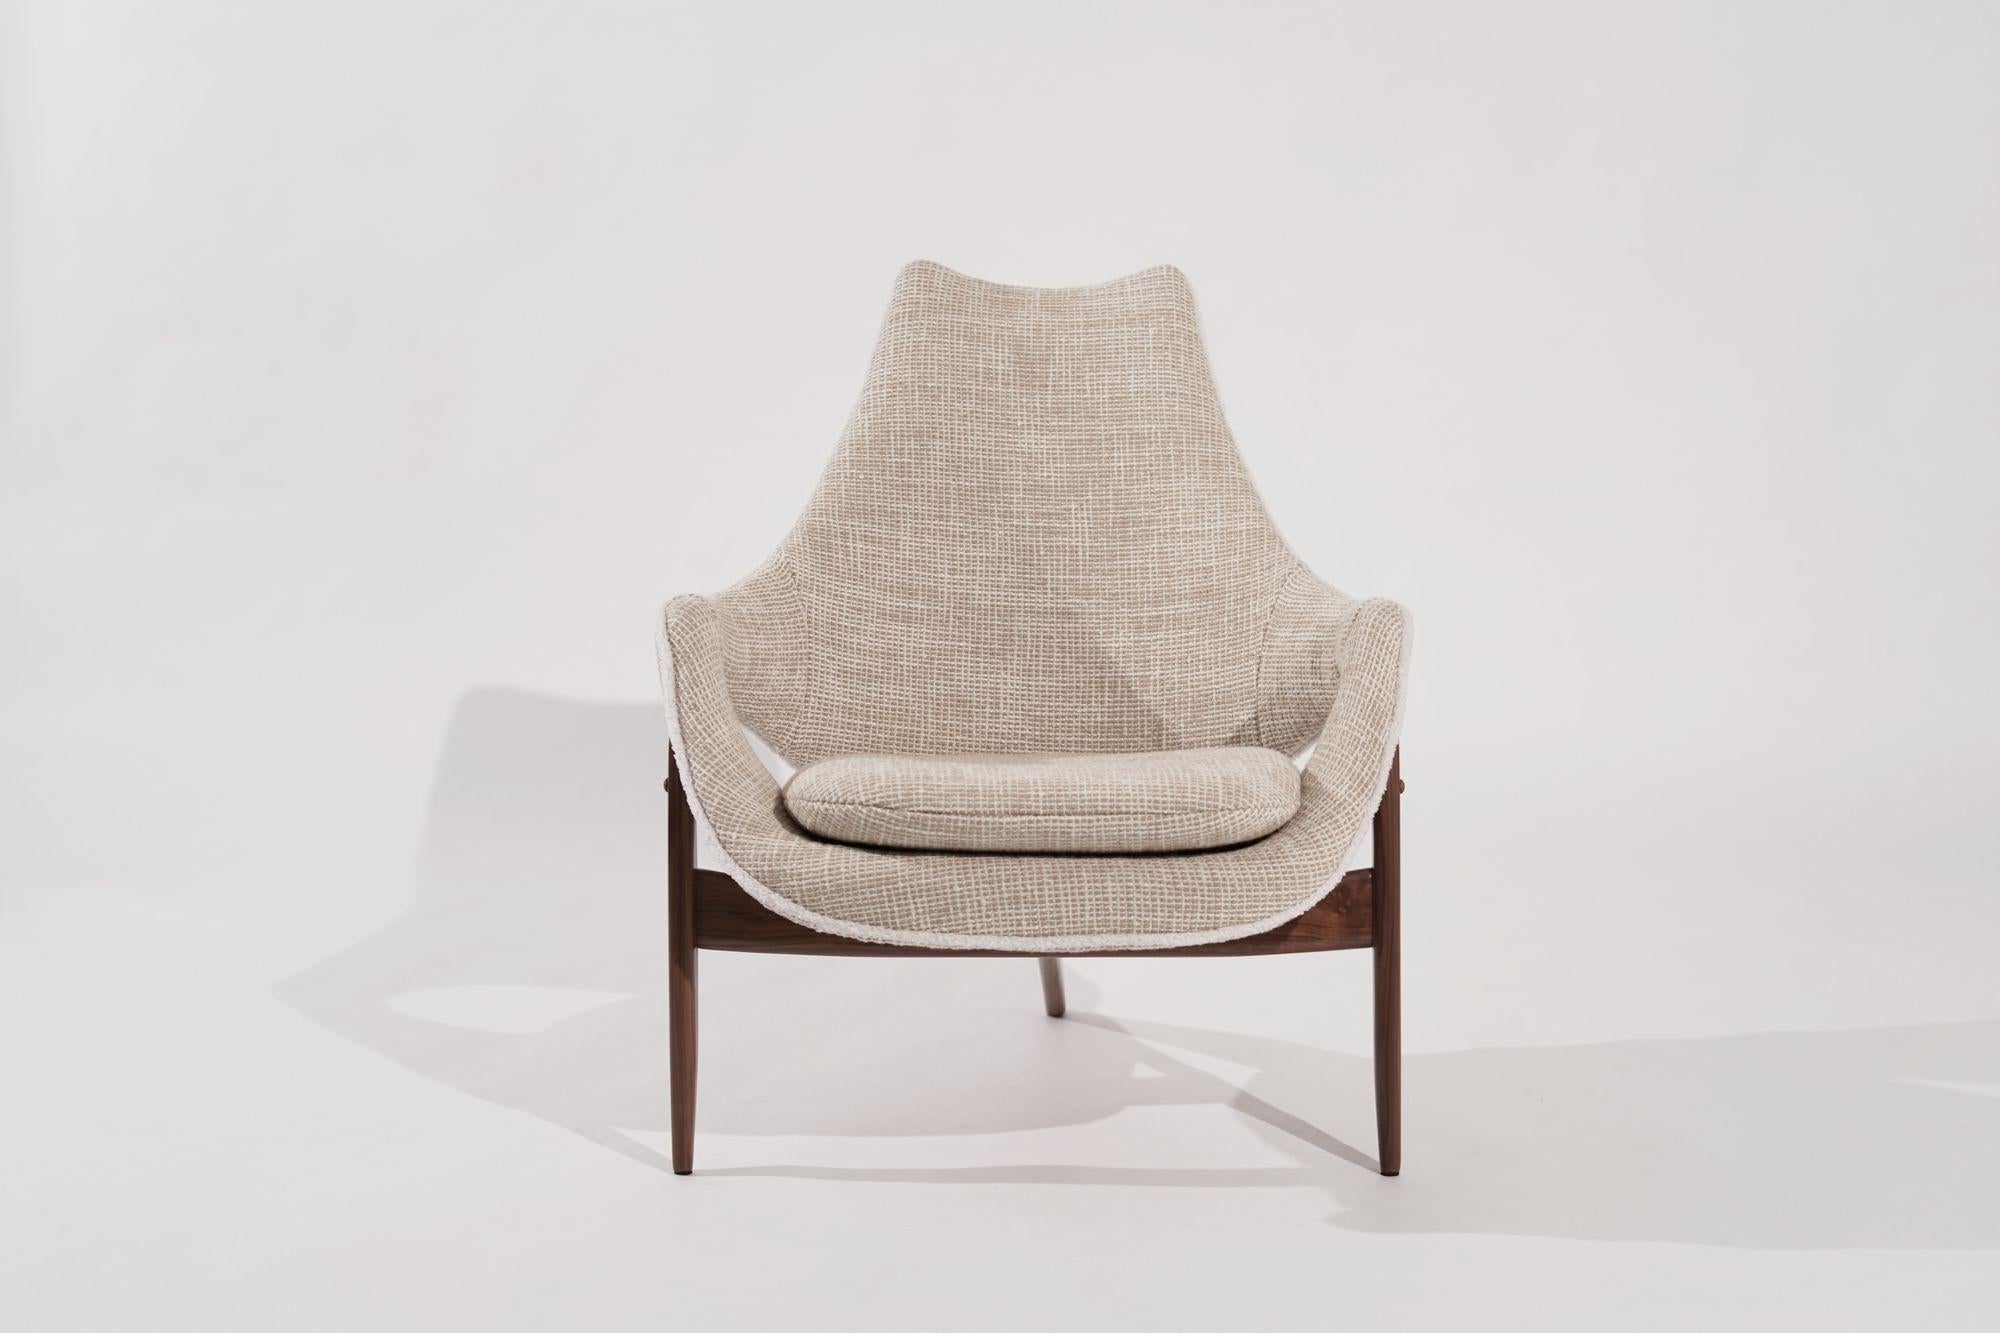 Canadian Lounge Chair by Luigi Tiengo for Cimon, Montreal, C. 1950s